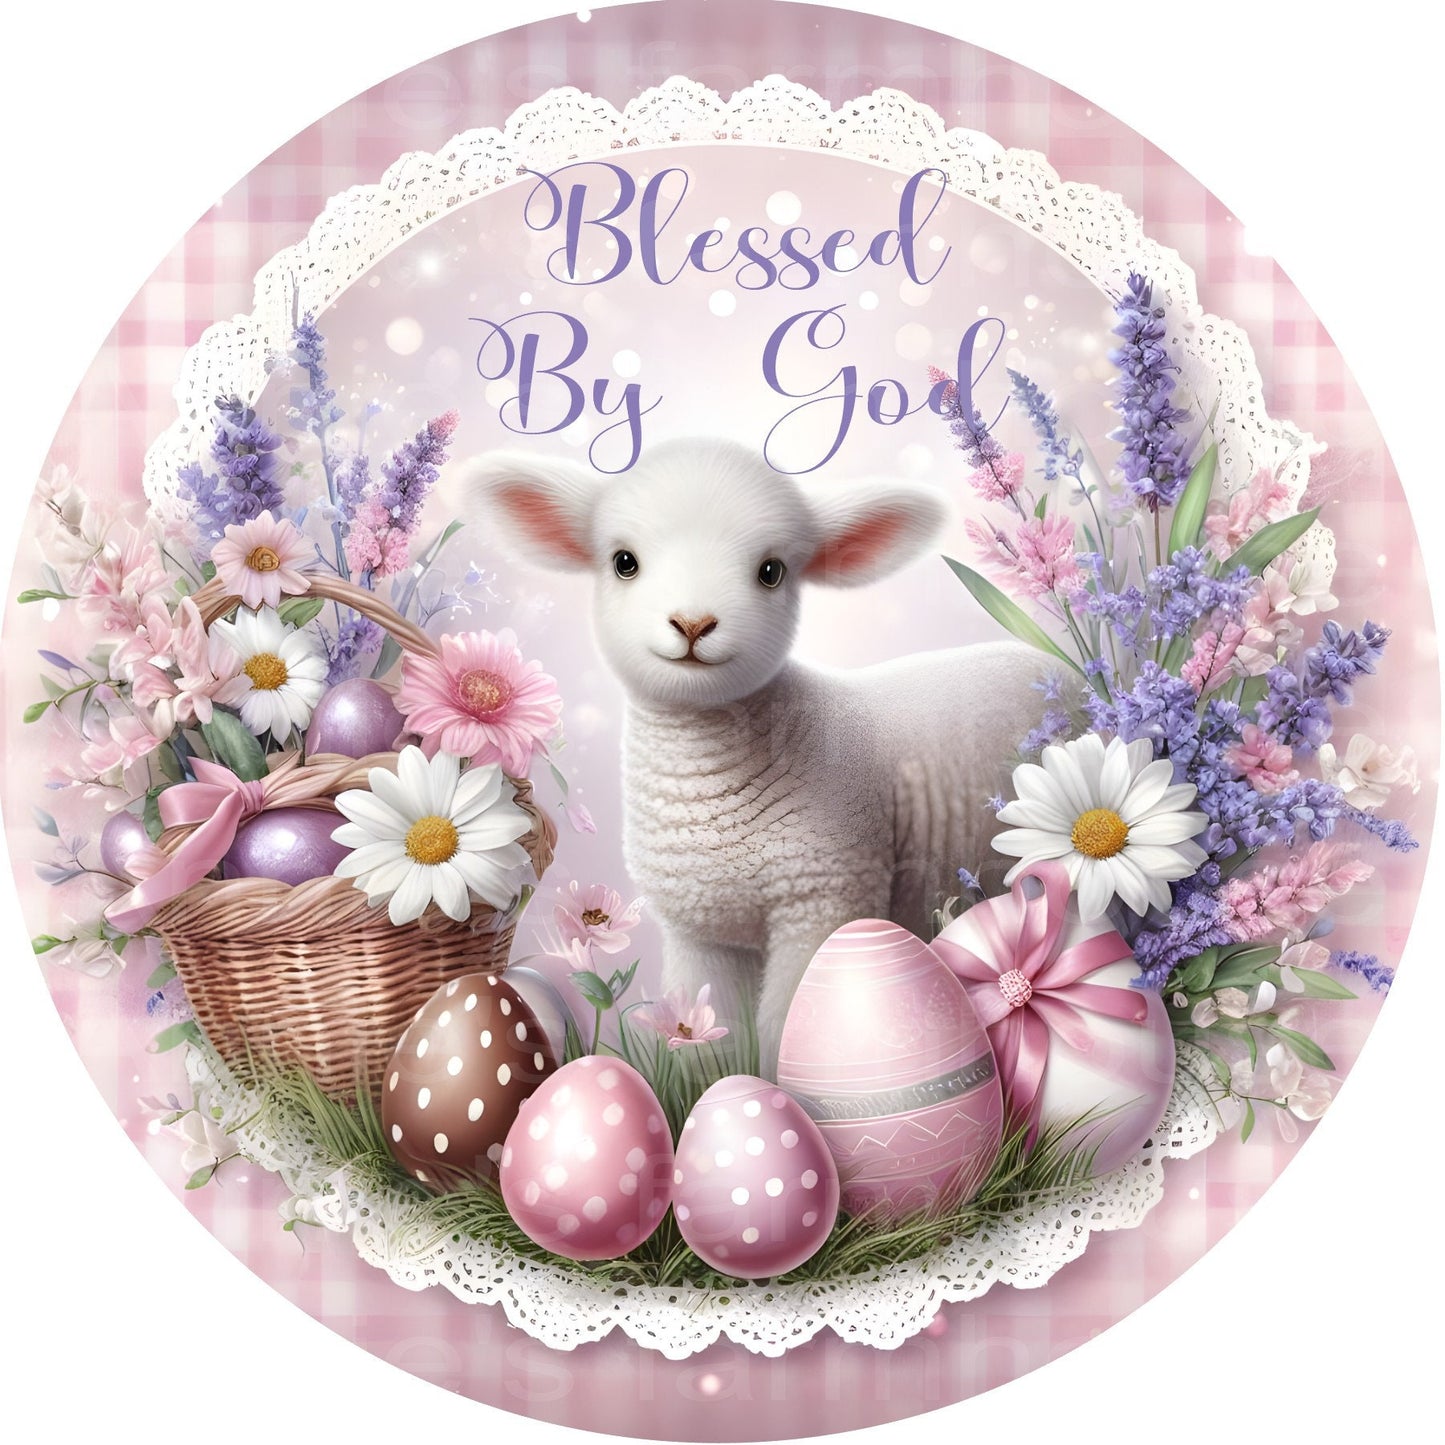 Easter Lamb round metal wreath sign, Easter eggs, Flowers, Lamb, wreath sign, center, attachment, plaque